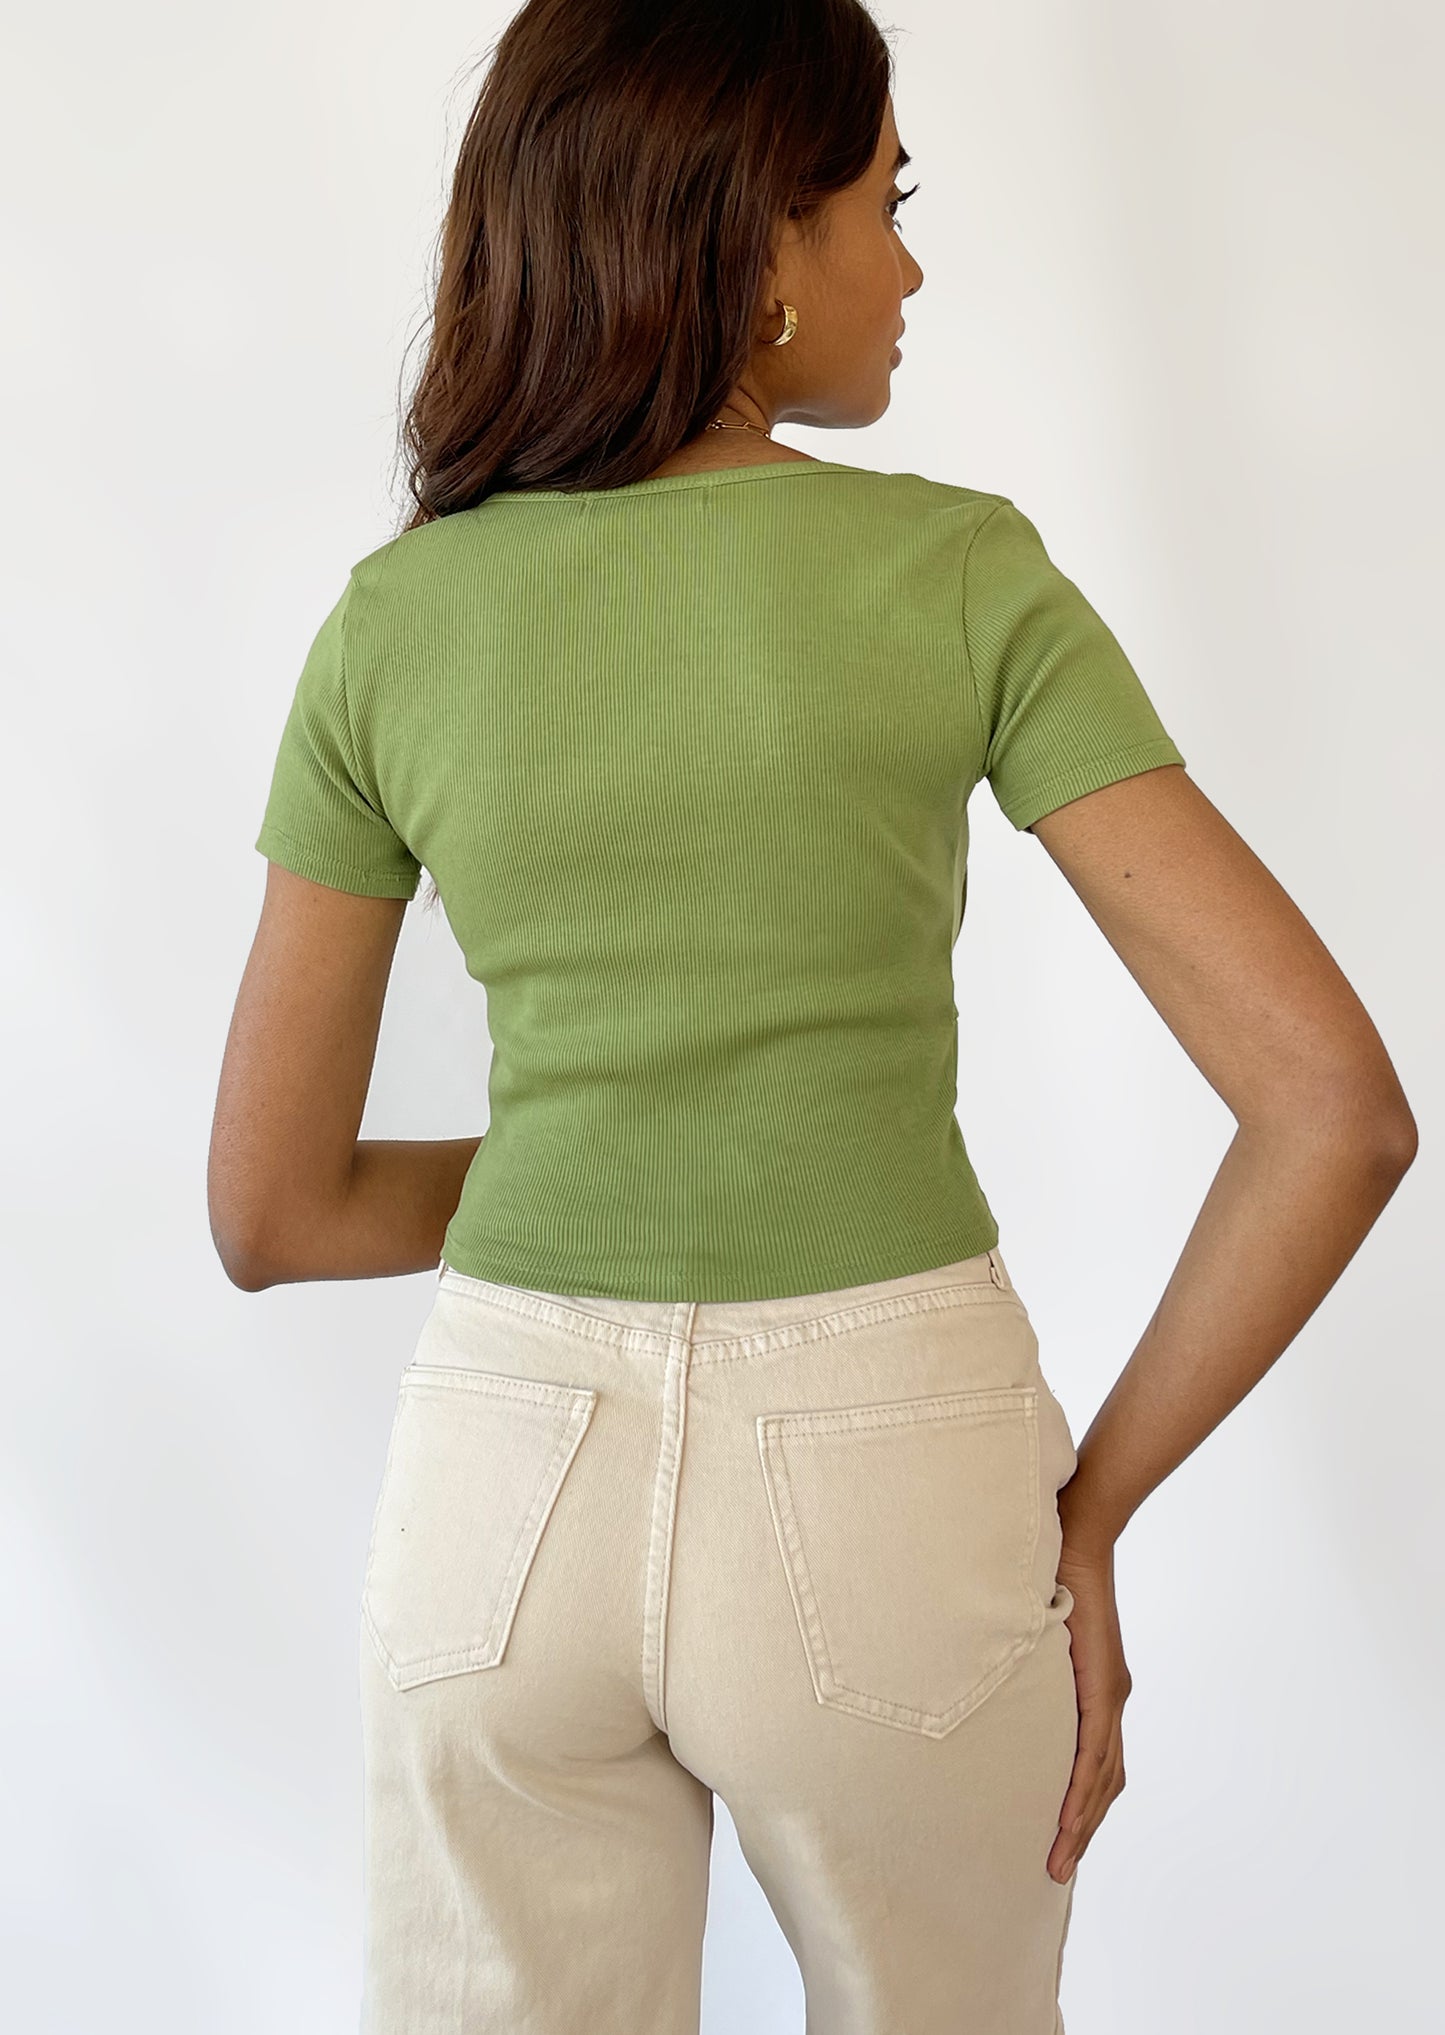 Ruched t-shirt in green